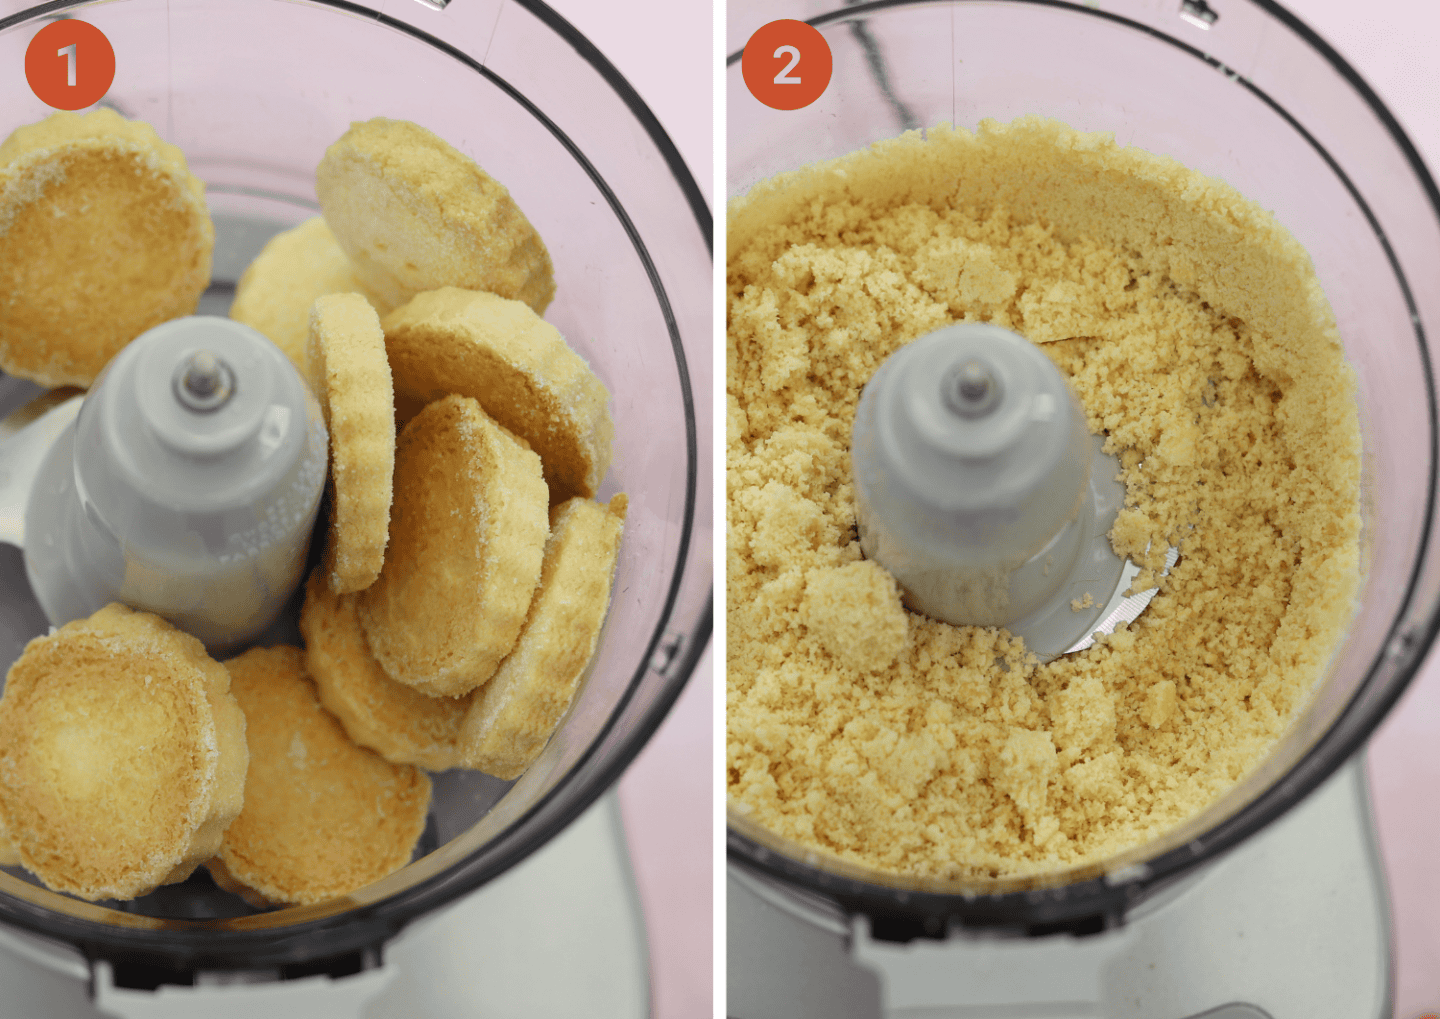 Blitzing the gluten free shortbread in a food processor to a crumb.